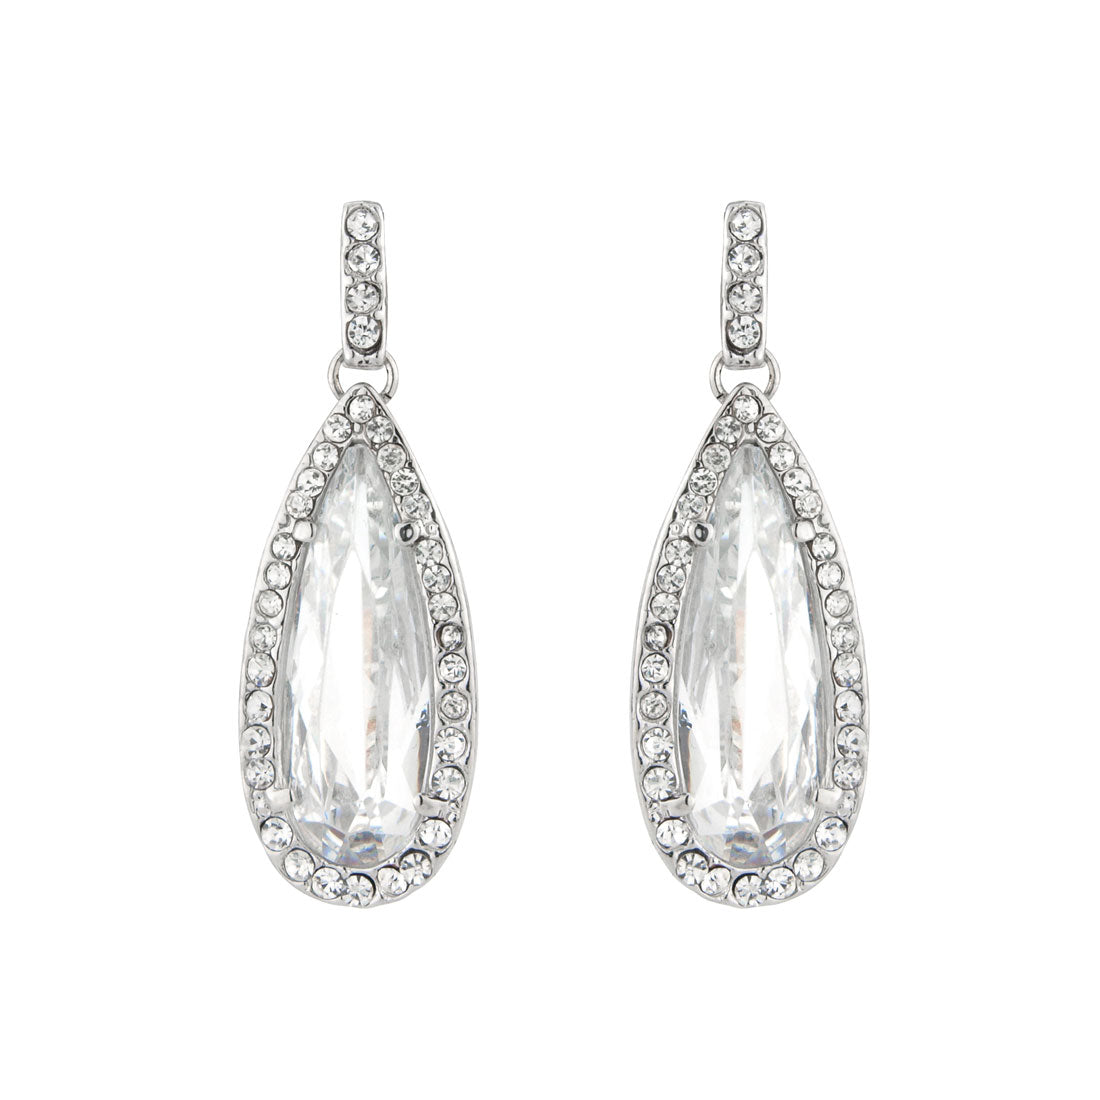 Exquisite Extravagance Crystal Drop Earrings for Weddings & Special Occasions